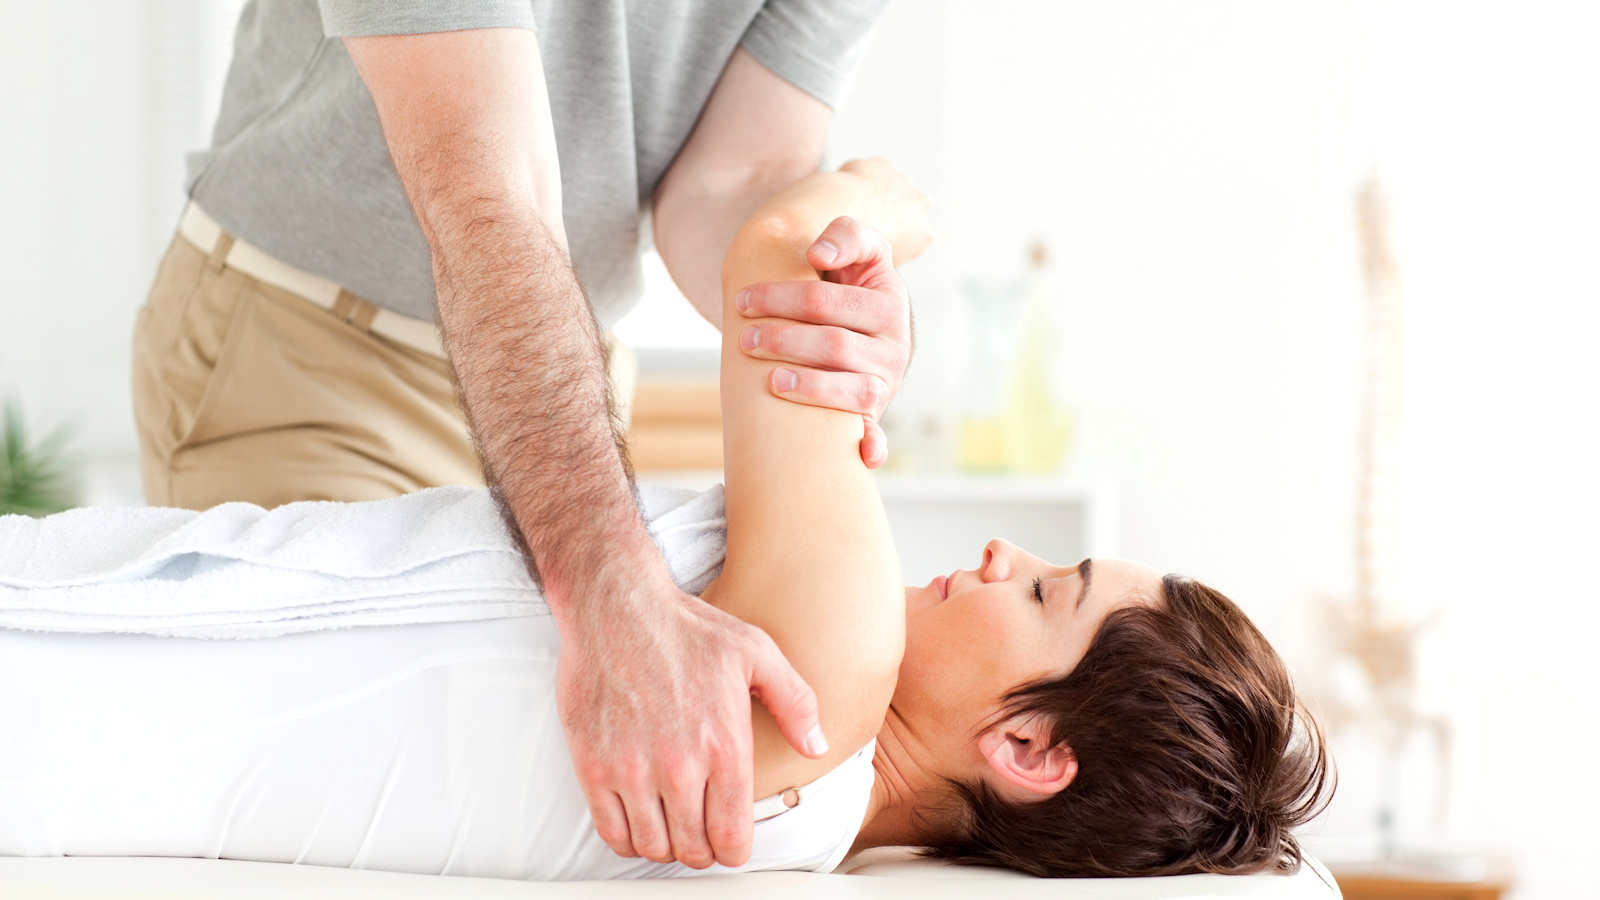 The Joint Chiropractic of Collierville